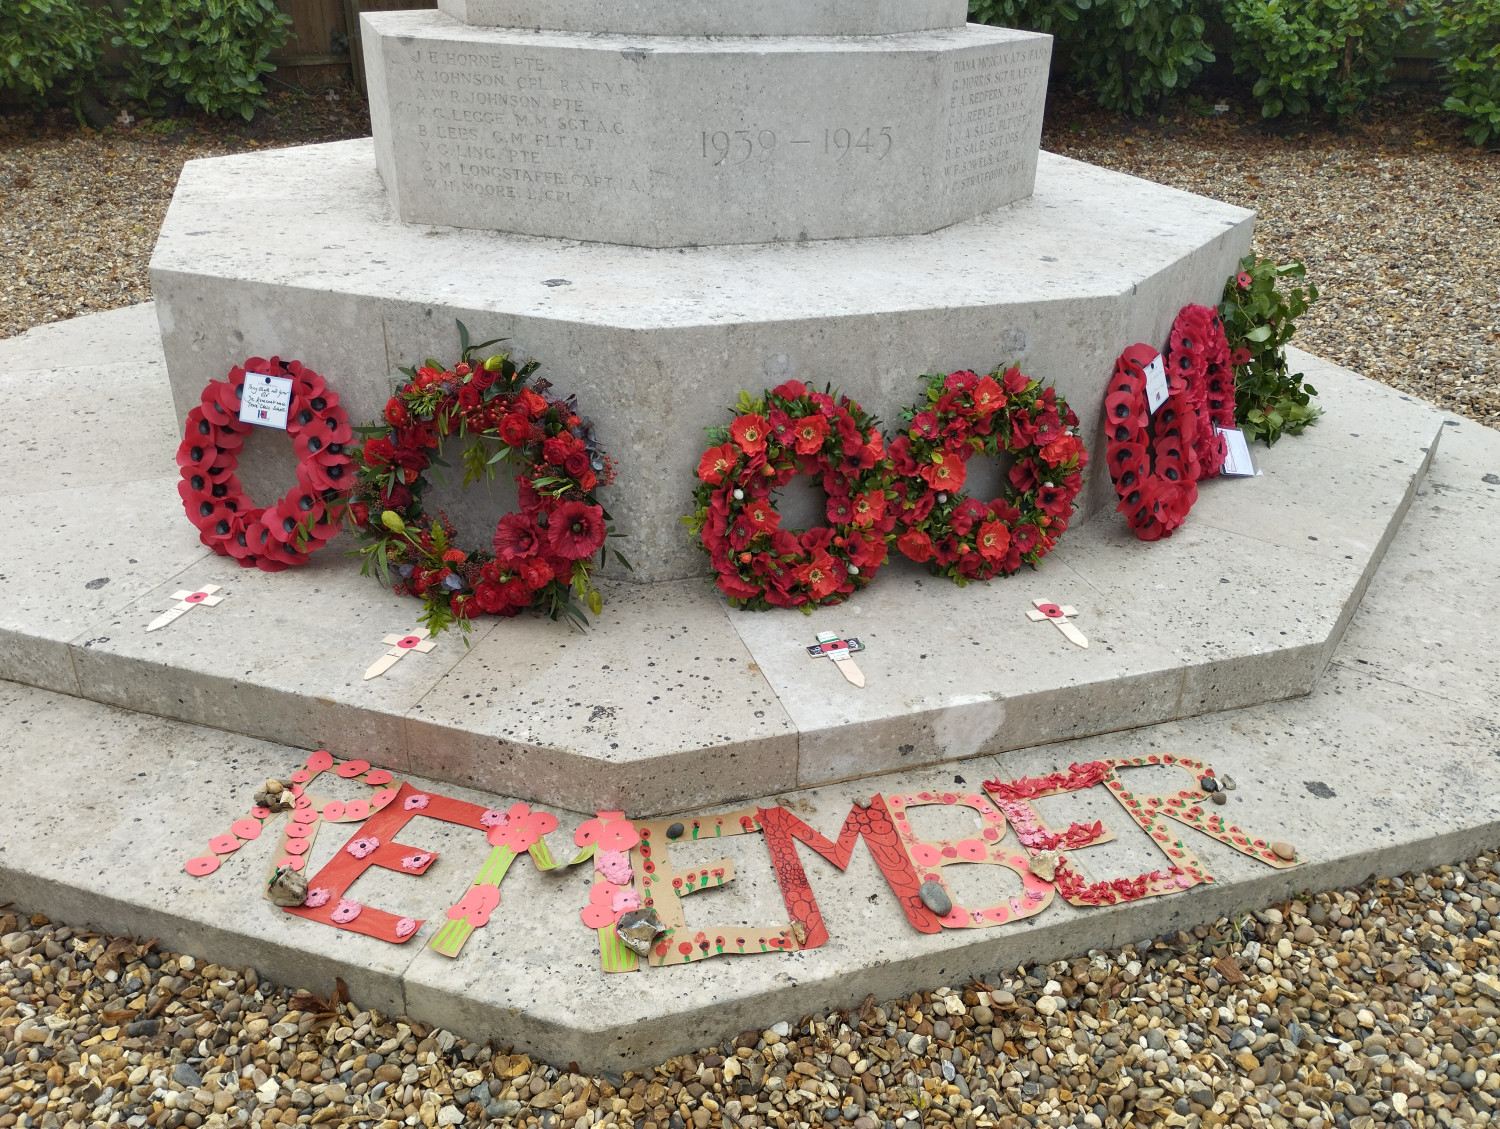 Image of 7 Poppy wreaths at foot of Eaton War Memorial taken by Patrick Richmond November 2022. The word Remember is spelt out in large card letters covered in poppy designs, made by local school children